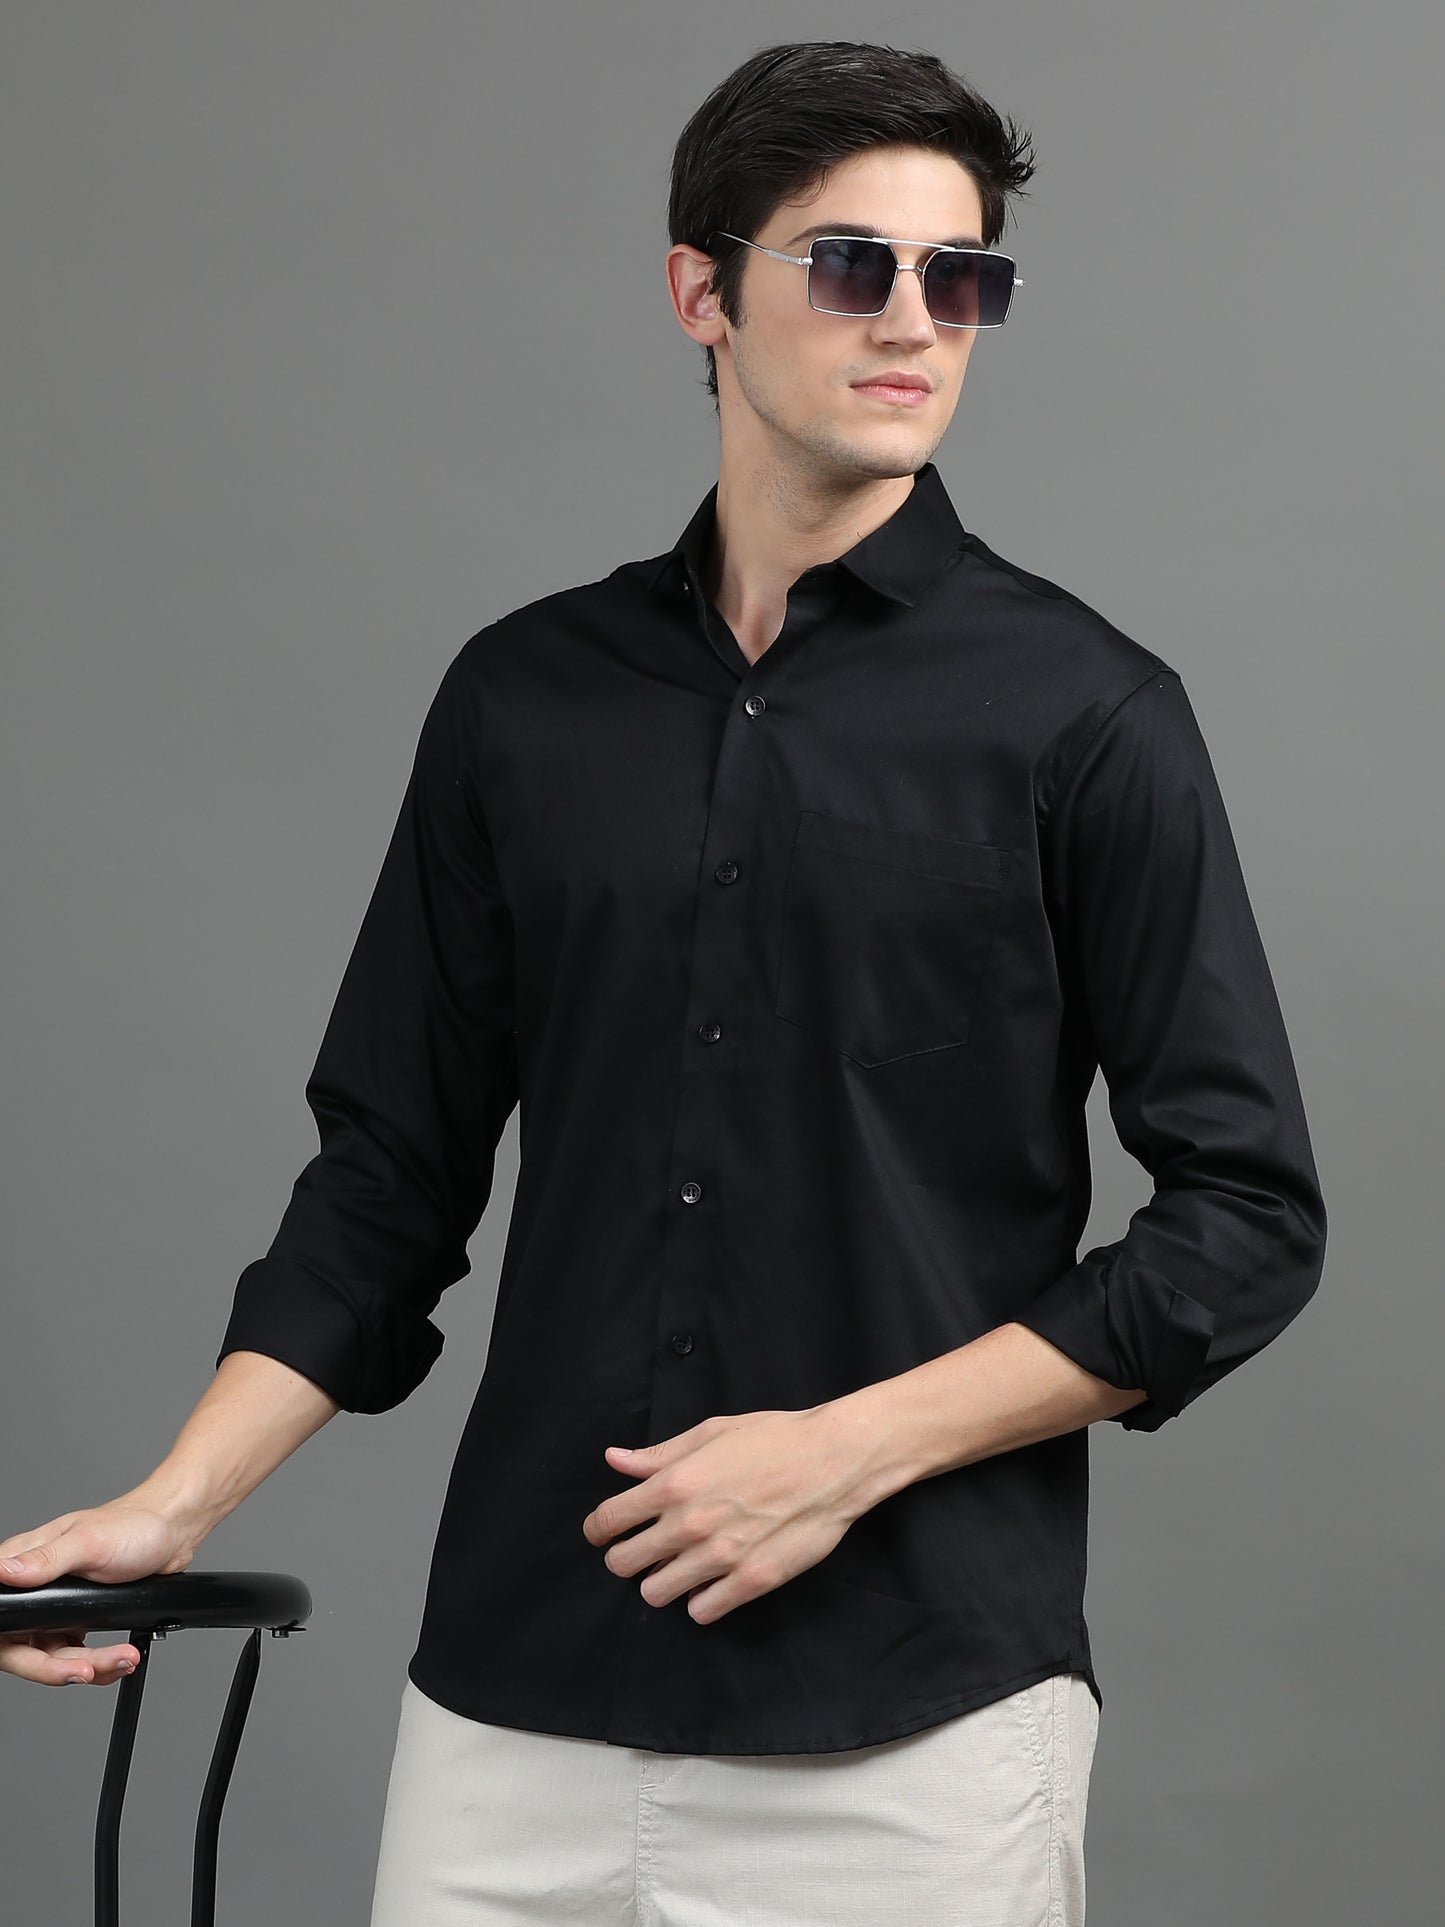 2Dudes Solid Black Full Sleeves Collor Neck Cotton Shirt